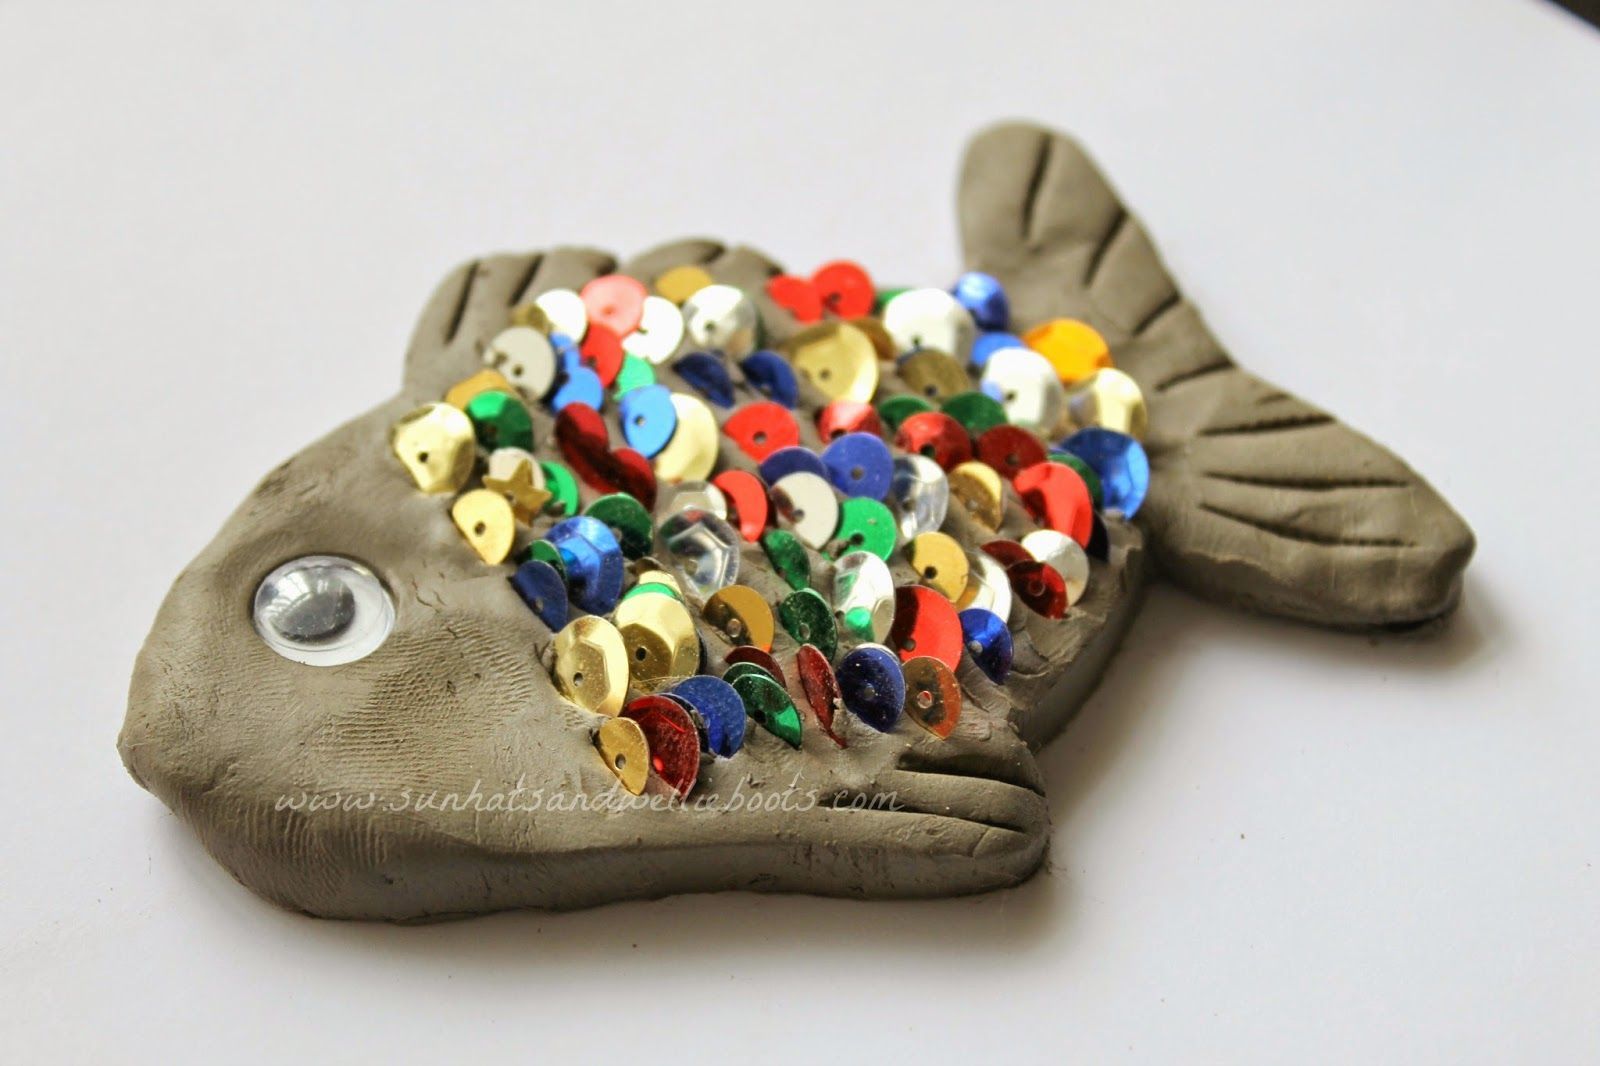 Cool kids art project. Clay fish with sequin scales. From Sun Hats & Wellie Boots